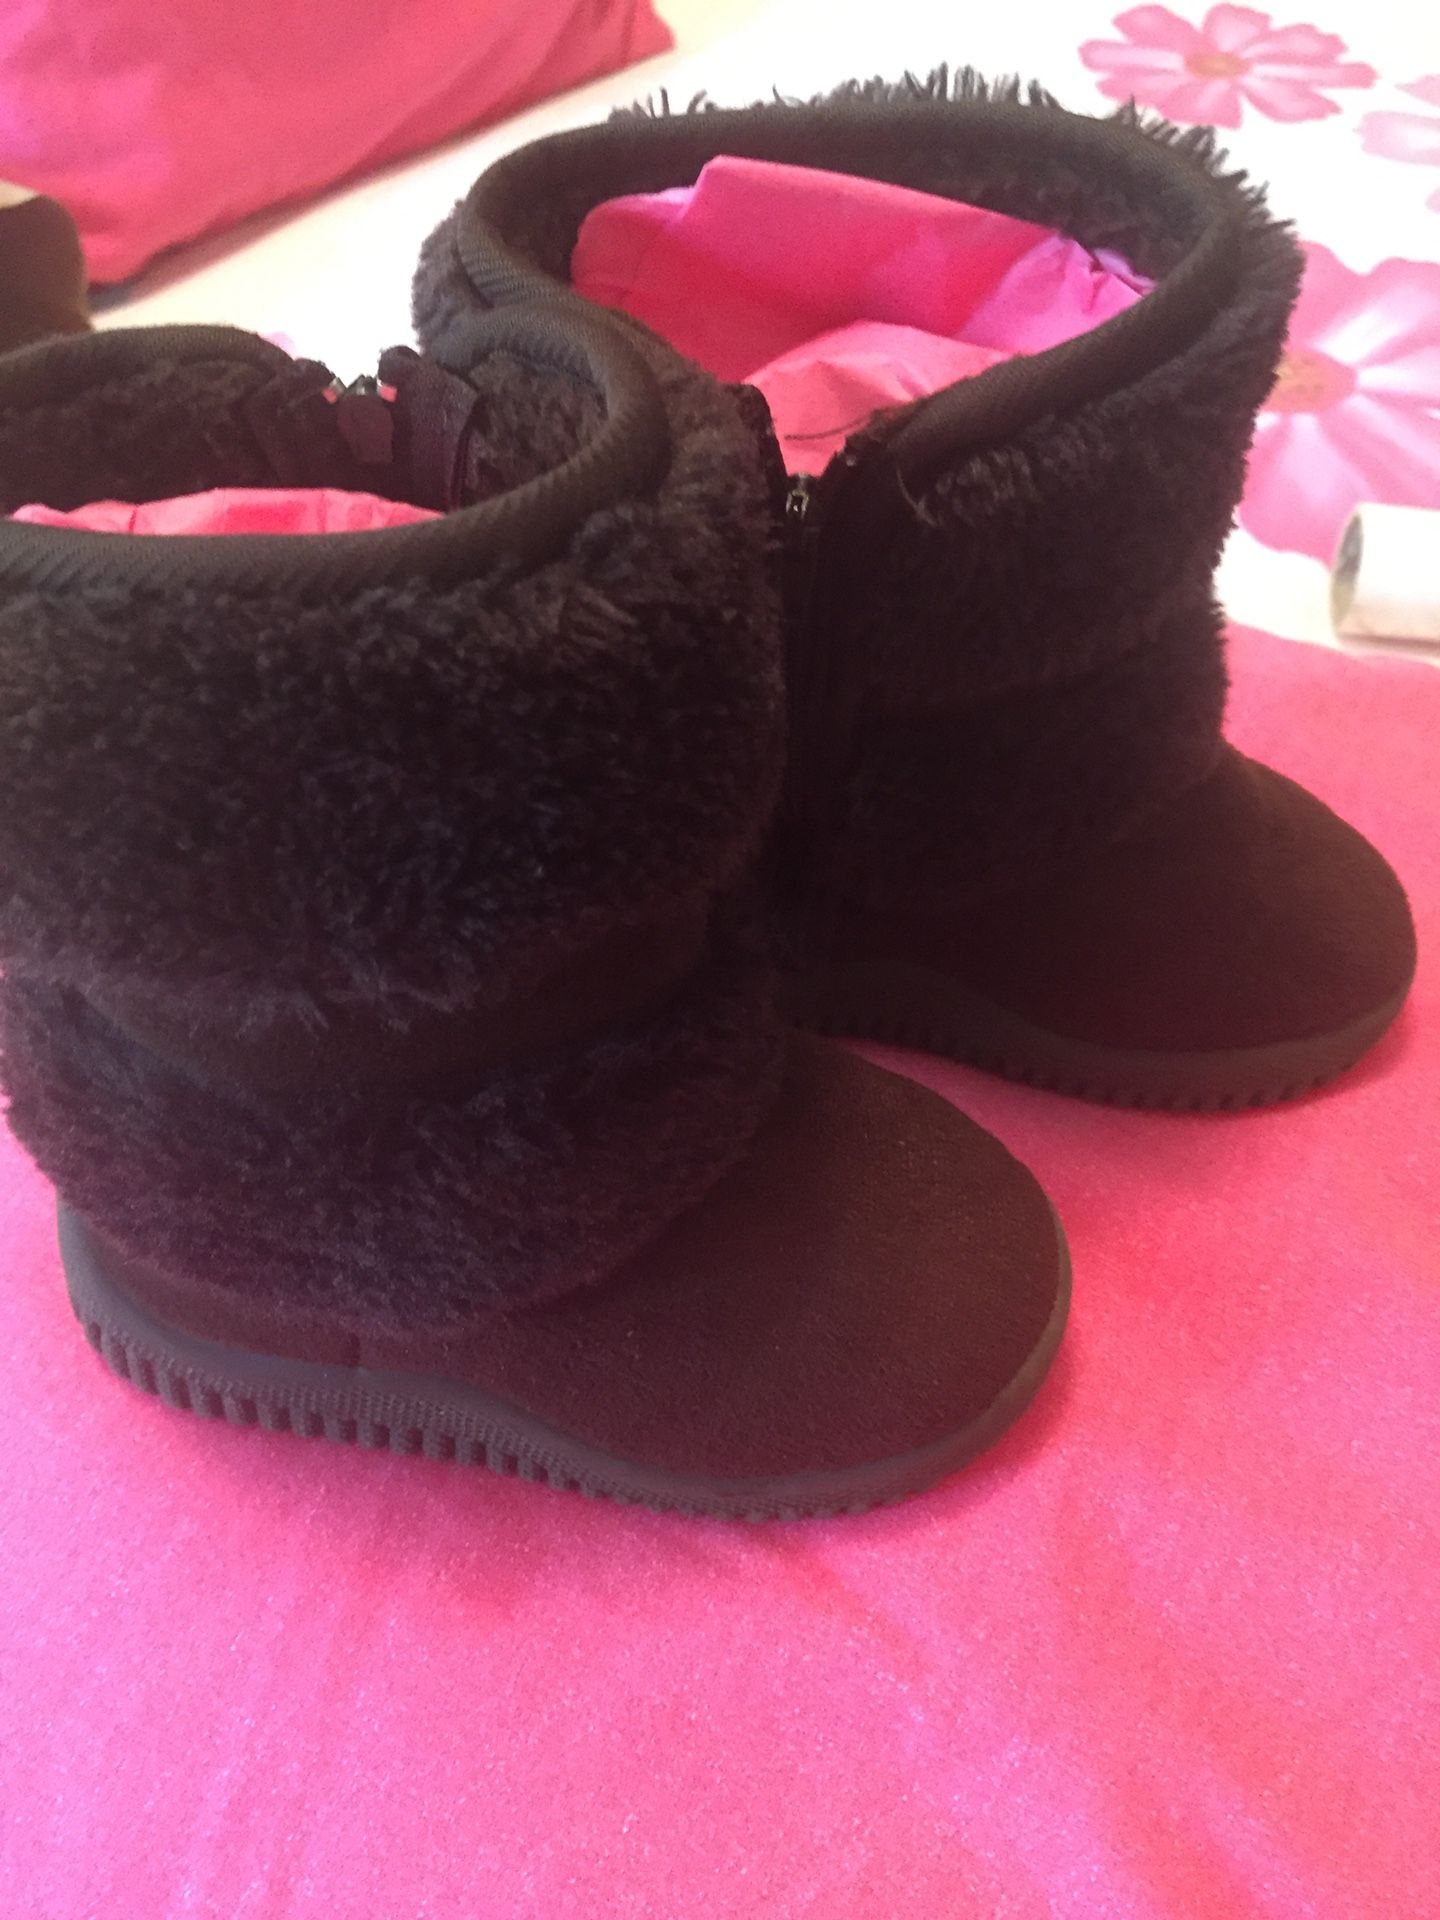 Boots for little girls size 7 good conditions. Super comfortable and soft